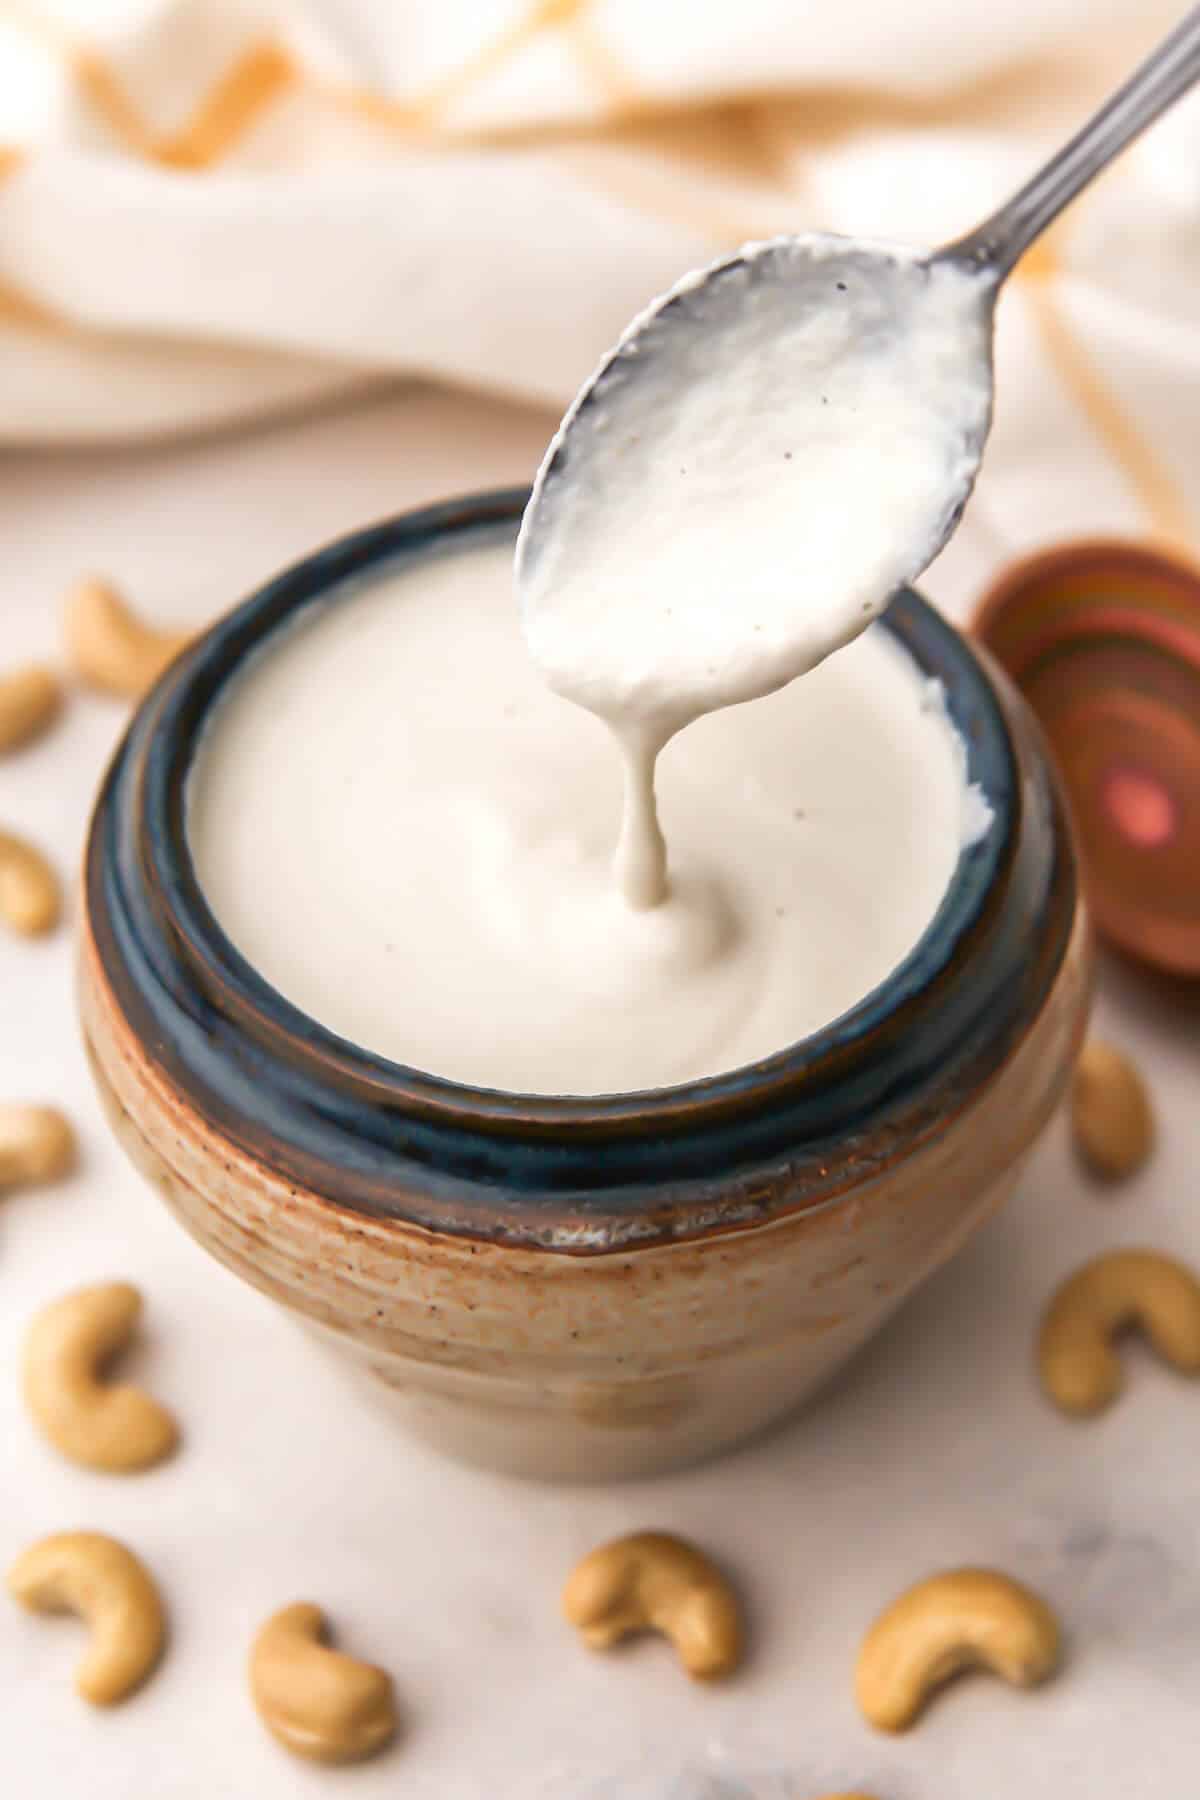 A jar of cashew cream with a spoon over it and cashews around it.